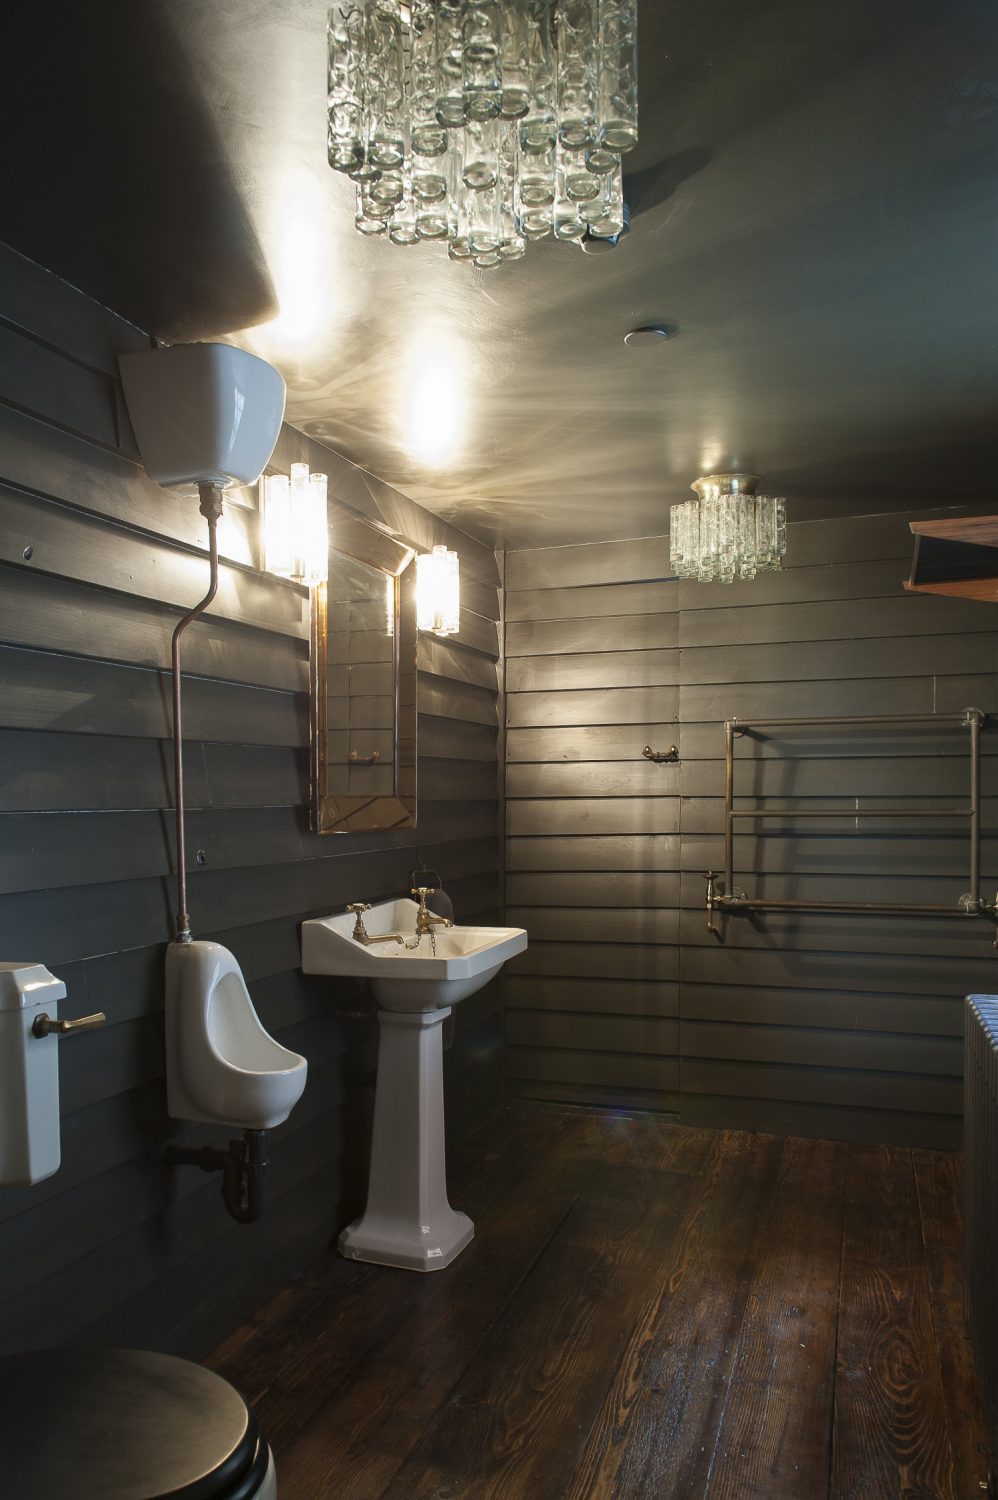 The Net Hut Cloakroom pays tribute to the Old Town fishing community’s famous black wooden structures